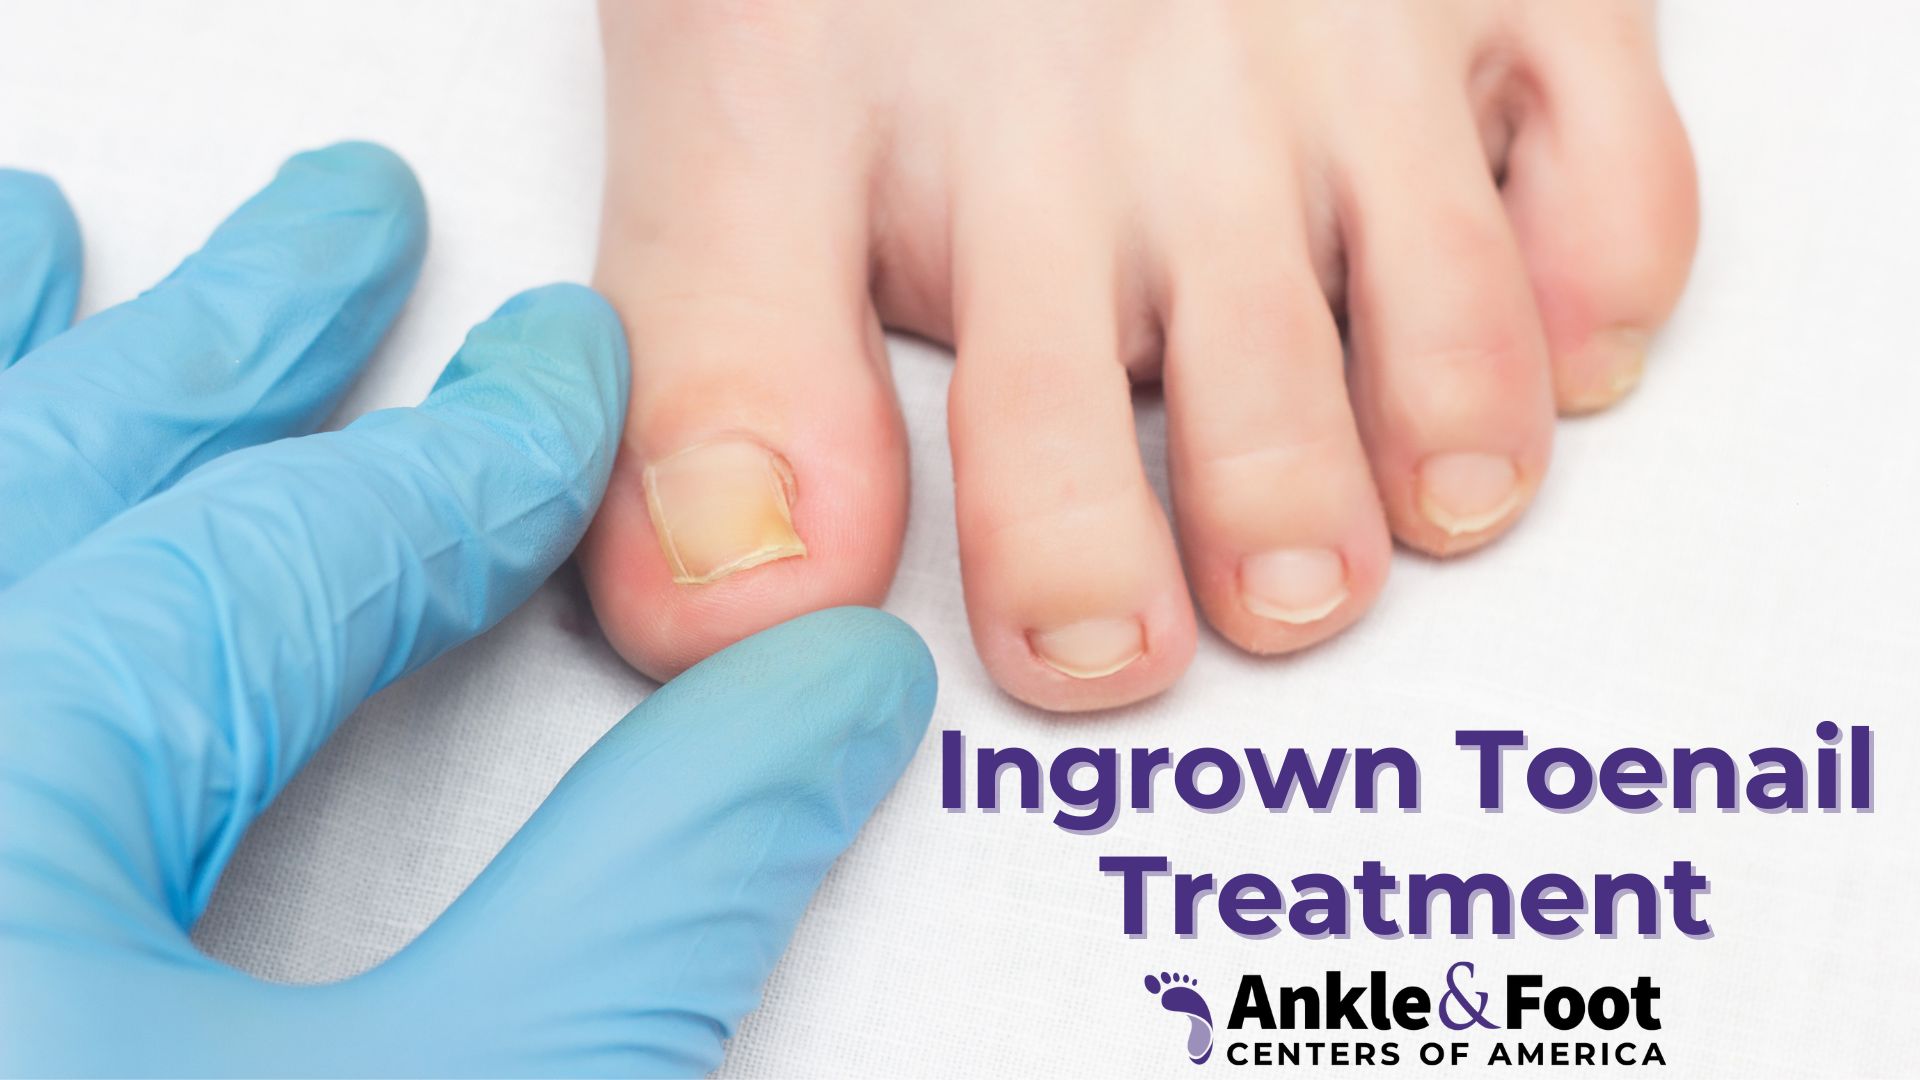 Ingrown Toenail Treatment  Ankle & Foot Centers of America